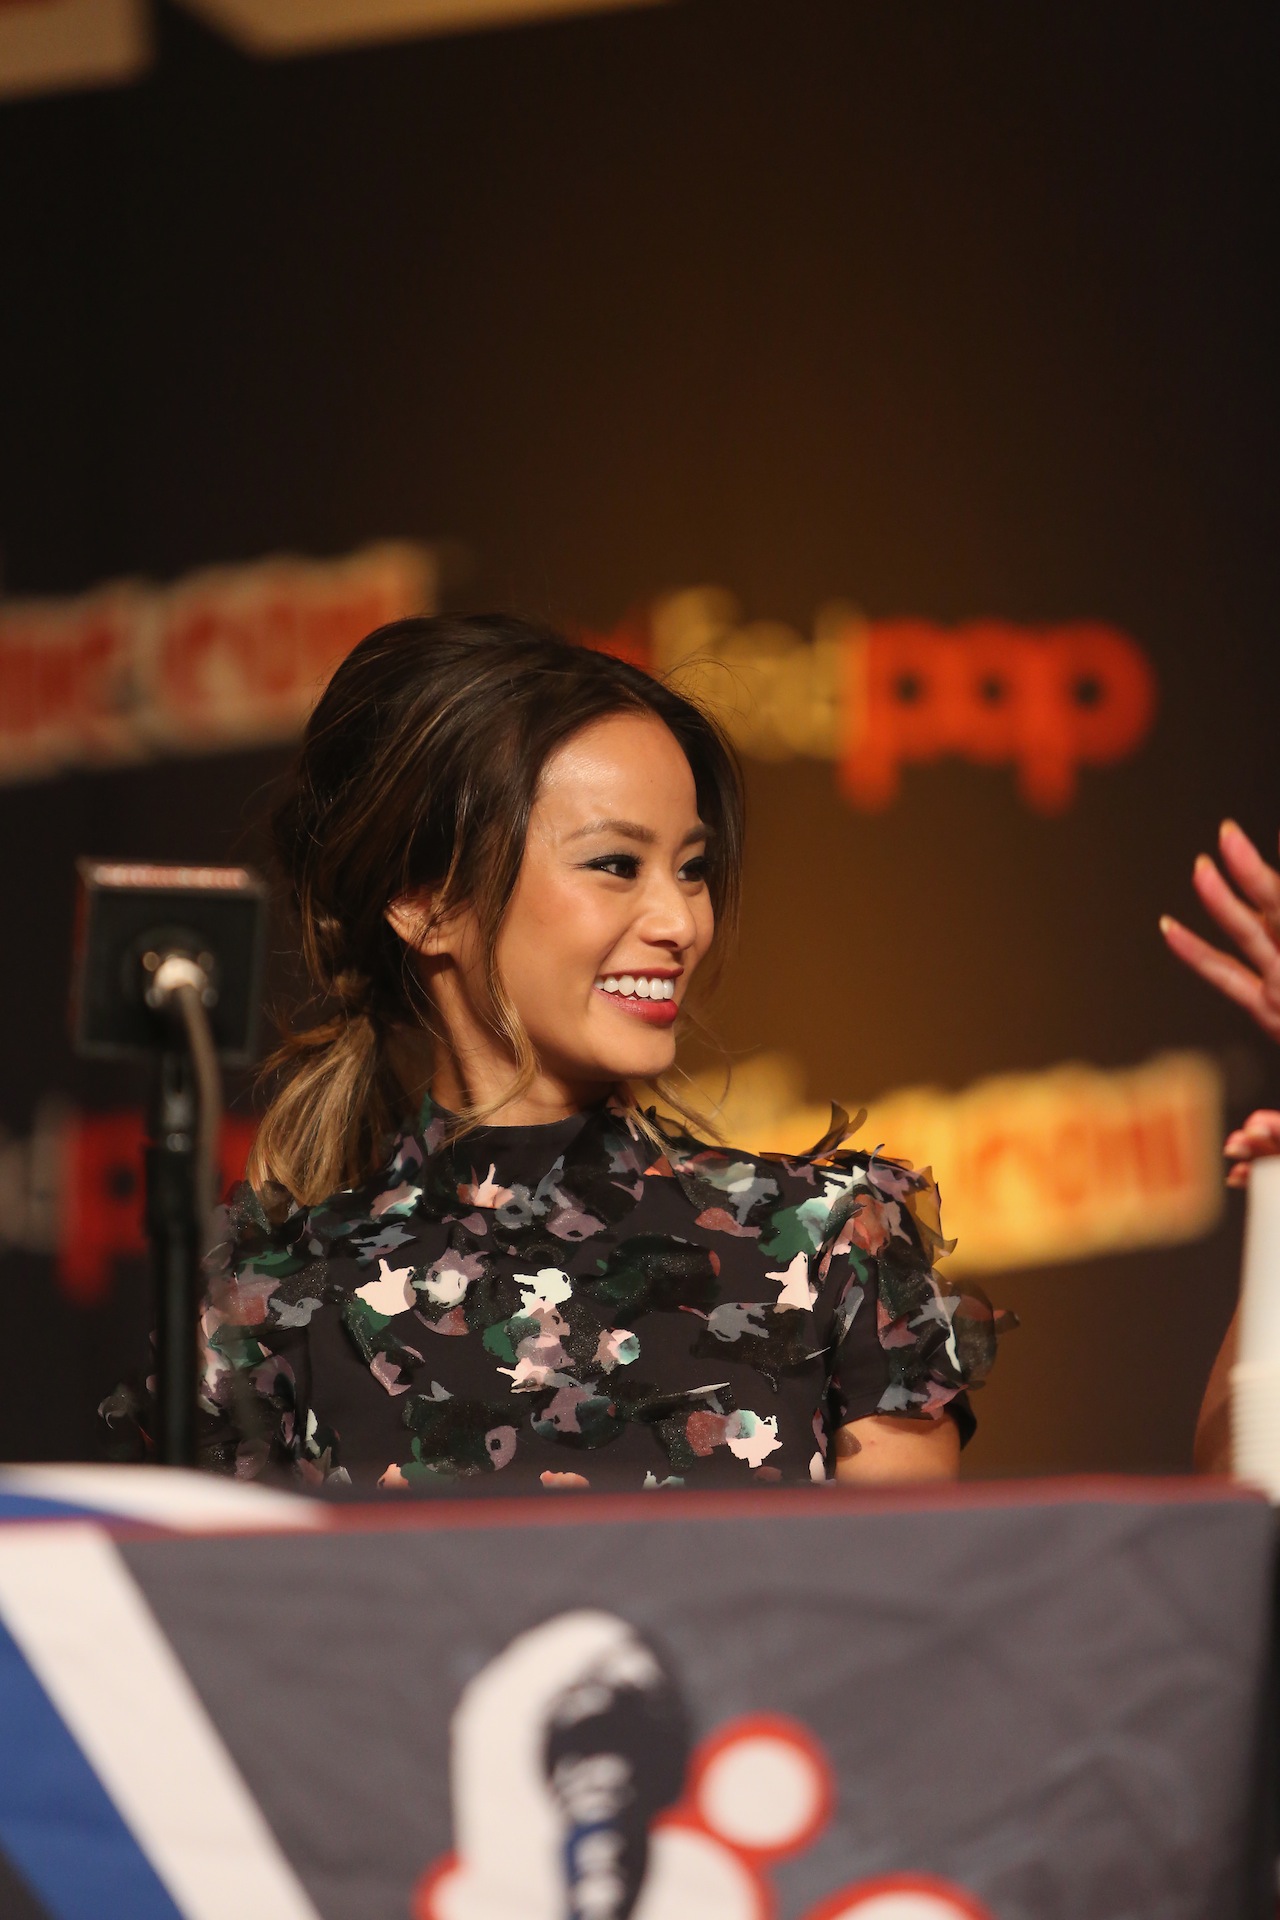 NEW YORK, NY - OCTOBER 09:  Actress Jamie Chung attends Walt Disney Studios' 2014 New York Comic Con presentation of "Big Hero 6" at the Javits Convention Center on Thursday October 9, 2014 in New York City.  (Photo by Jason Carter Rinaldi/Getty Images for Disney) *** Local Caption *** Jamie Chung